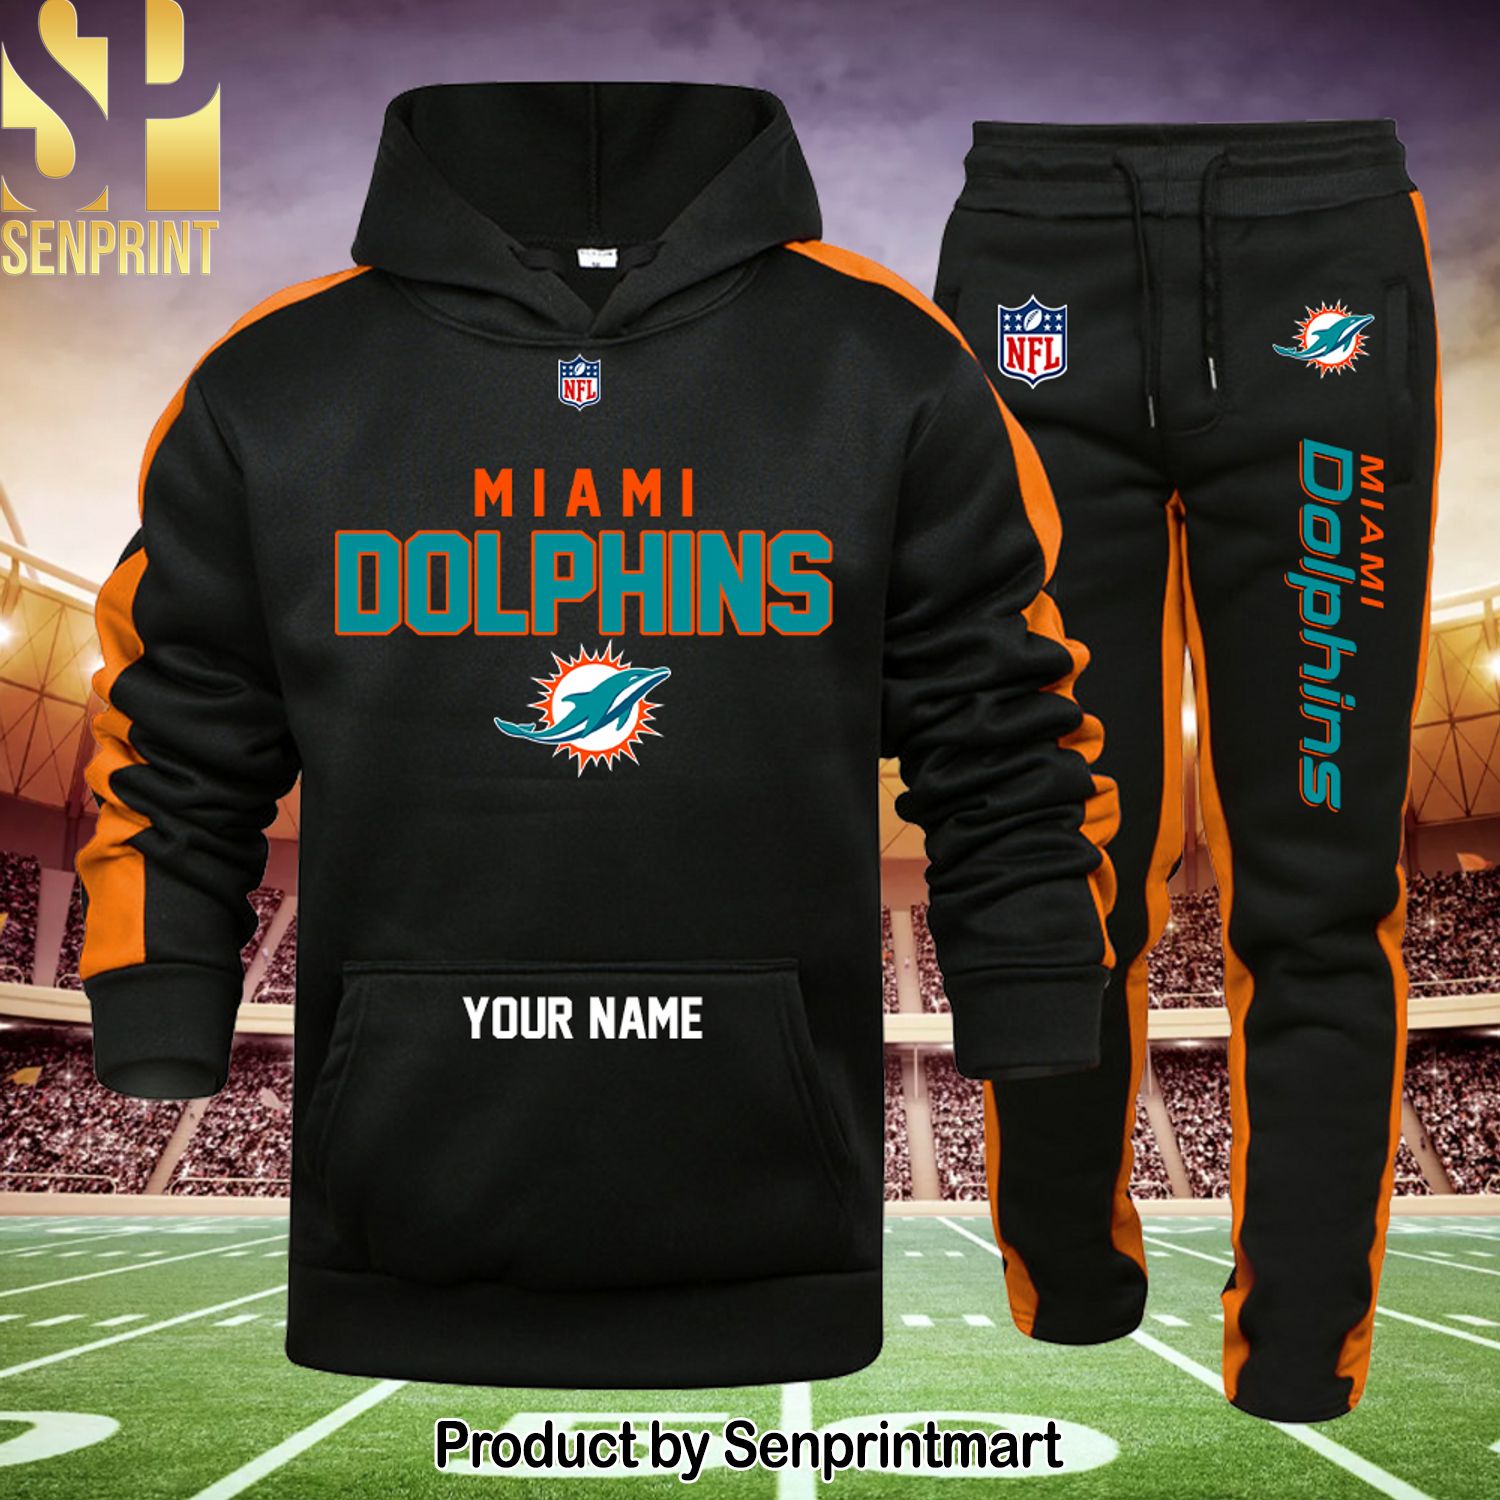 NFL Miami Dolphins New Style Full Print Shirt and Sweatpants